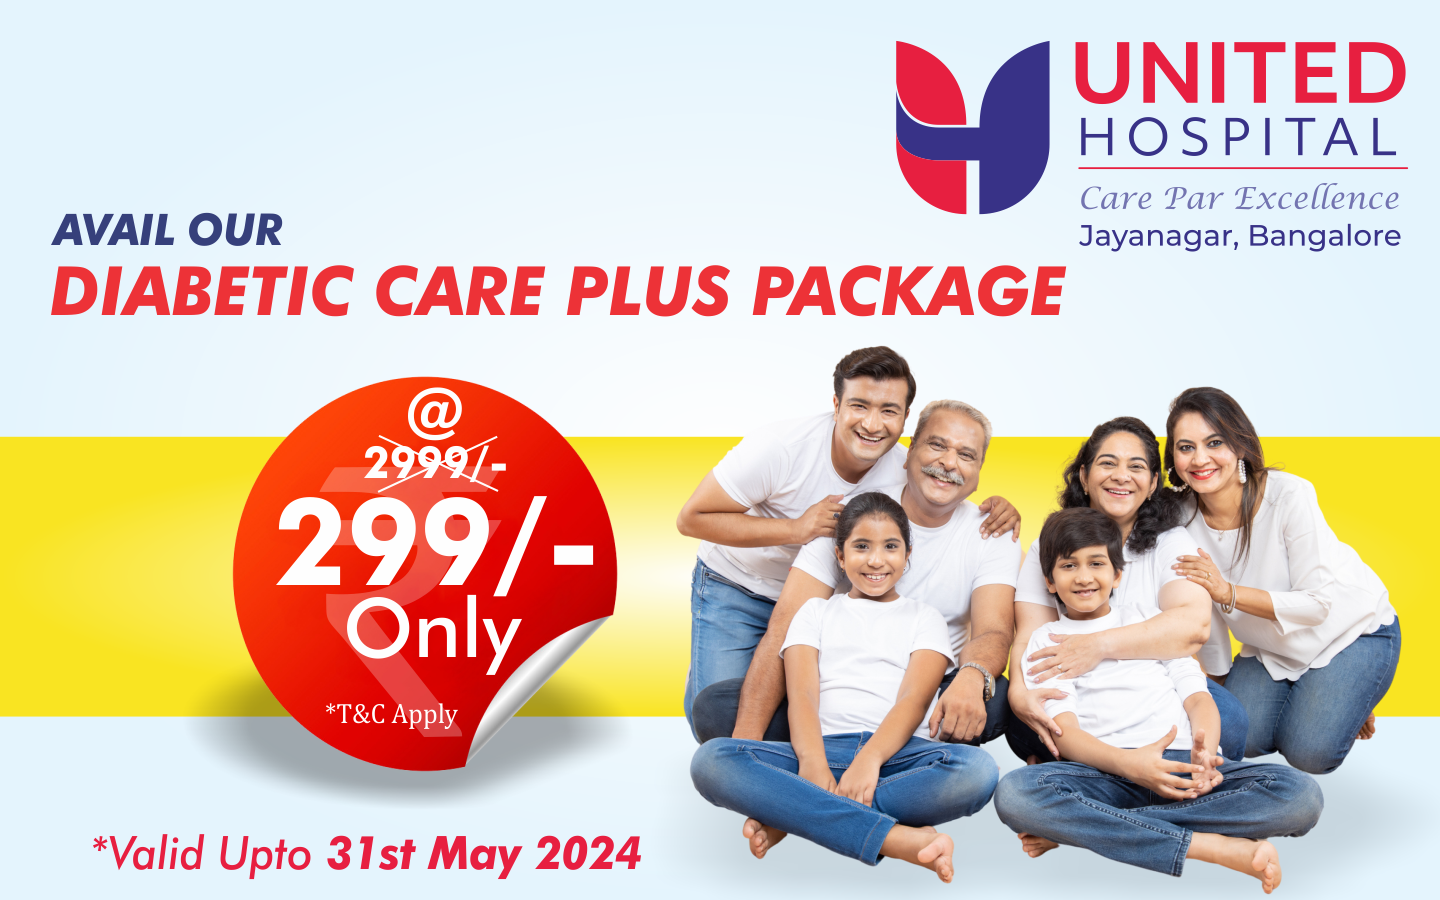 UH - Womens Day Health Package